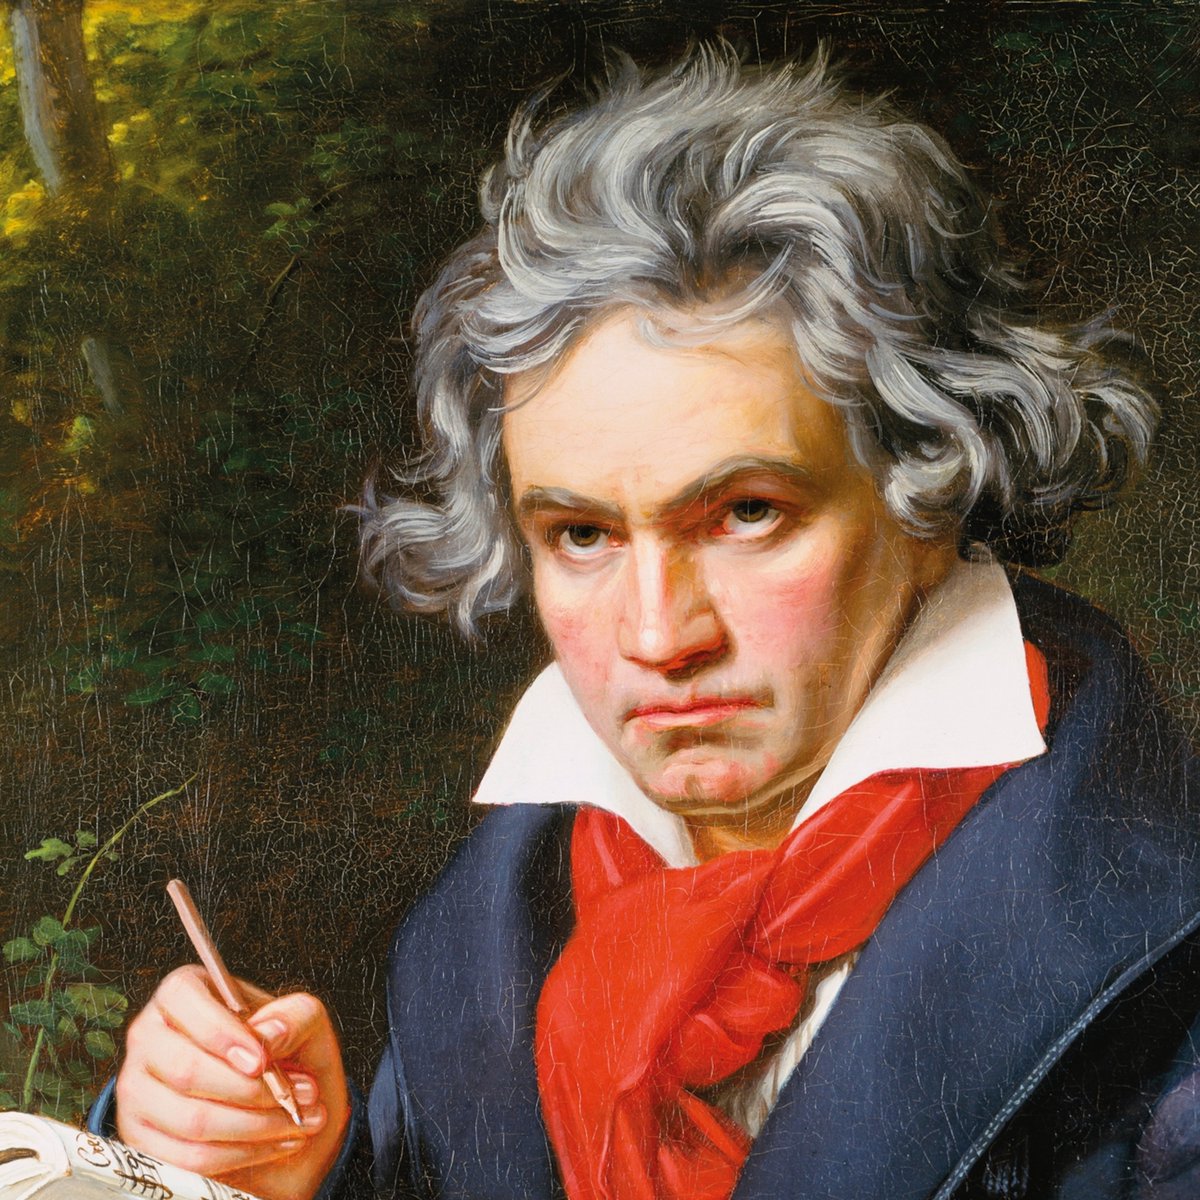 Beethoven’s mighty ‘Emperor’ Concerto is one of the most popular and enduring concertos in the classical repertoire. Join us in Southwold on New Year's Day to see in 2024 with this wonderful music! ticketsource.co.uk/southwoldmusic…